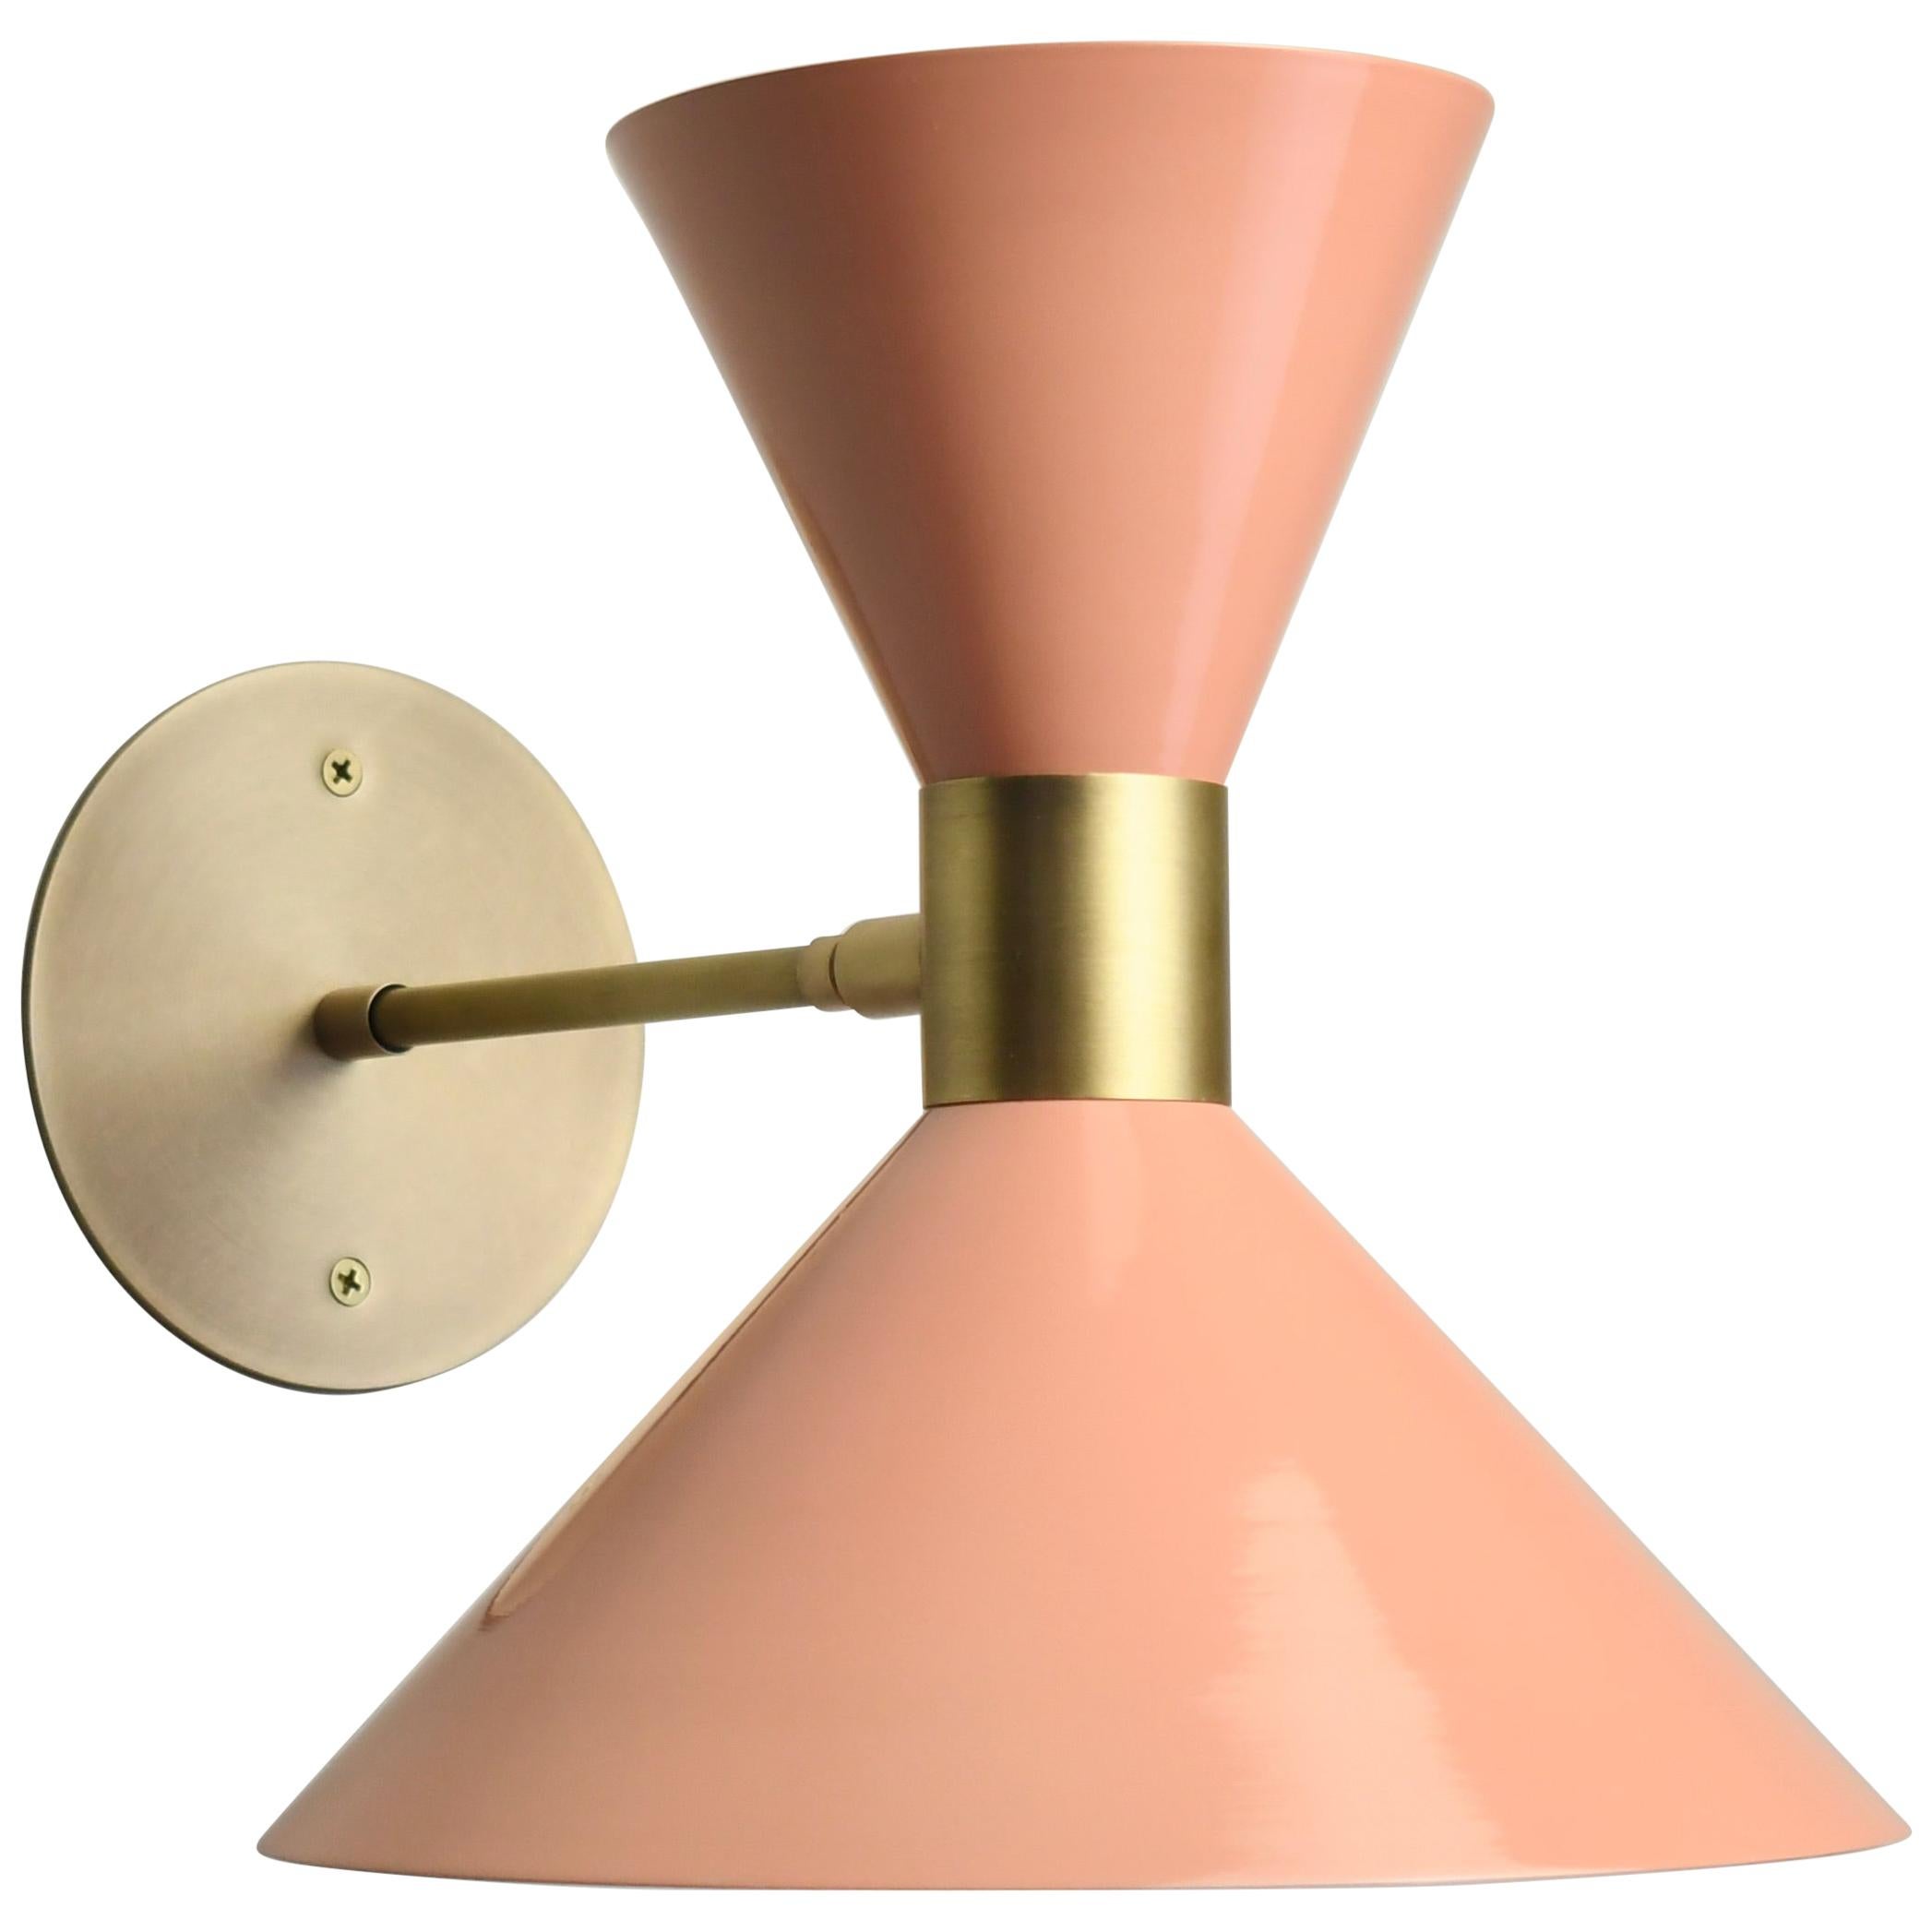 Large Scale Monarch Wall Sconce in Brass & Blush Enamel by Blueprint Lighting For Sale